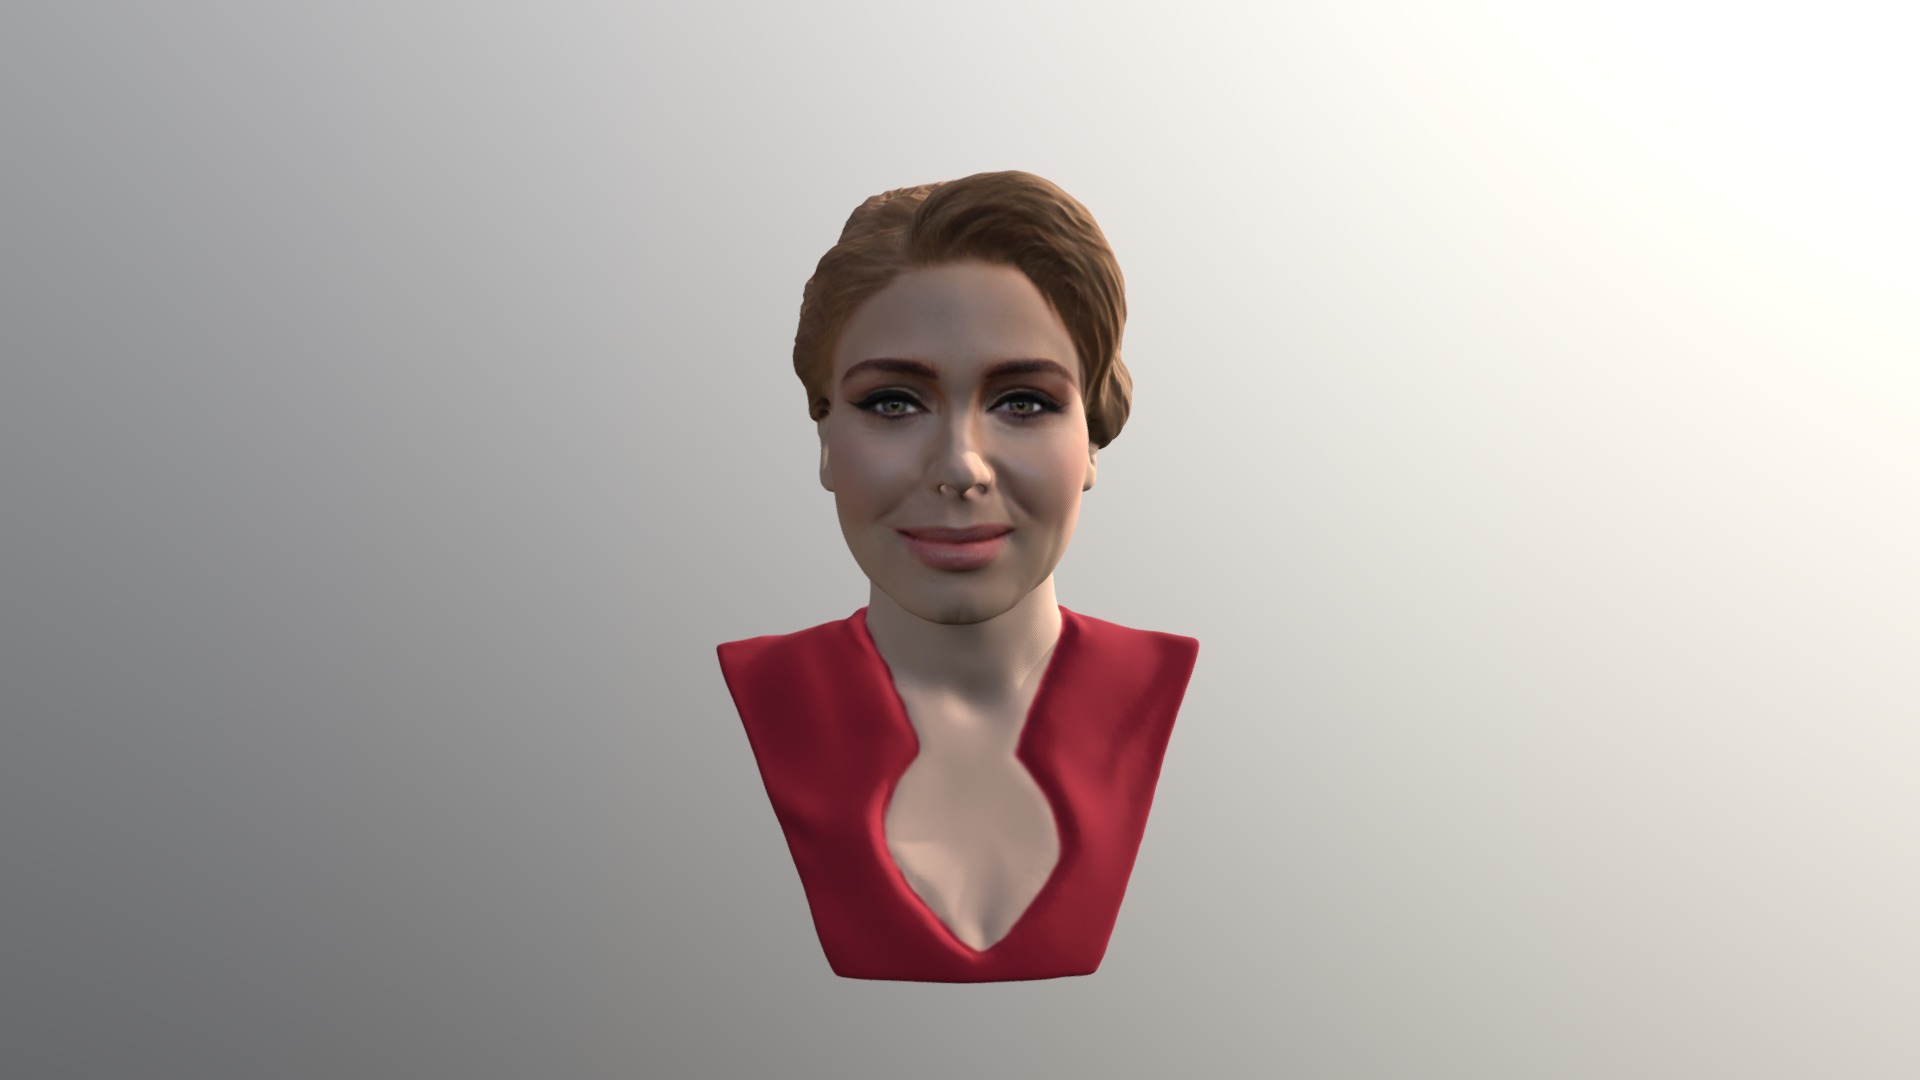 3D model Adele bust ready for full color 3D printing - This is a 3D model of the Adele bust ready for full color 3D printing. The 3D model is about a woman with short hair.